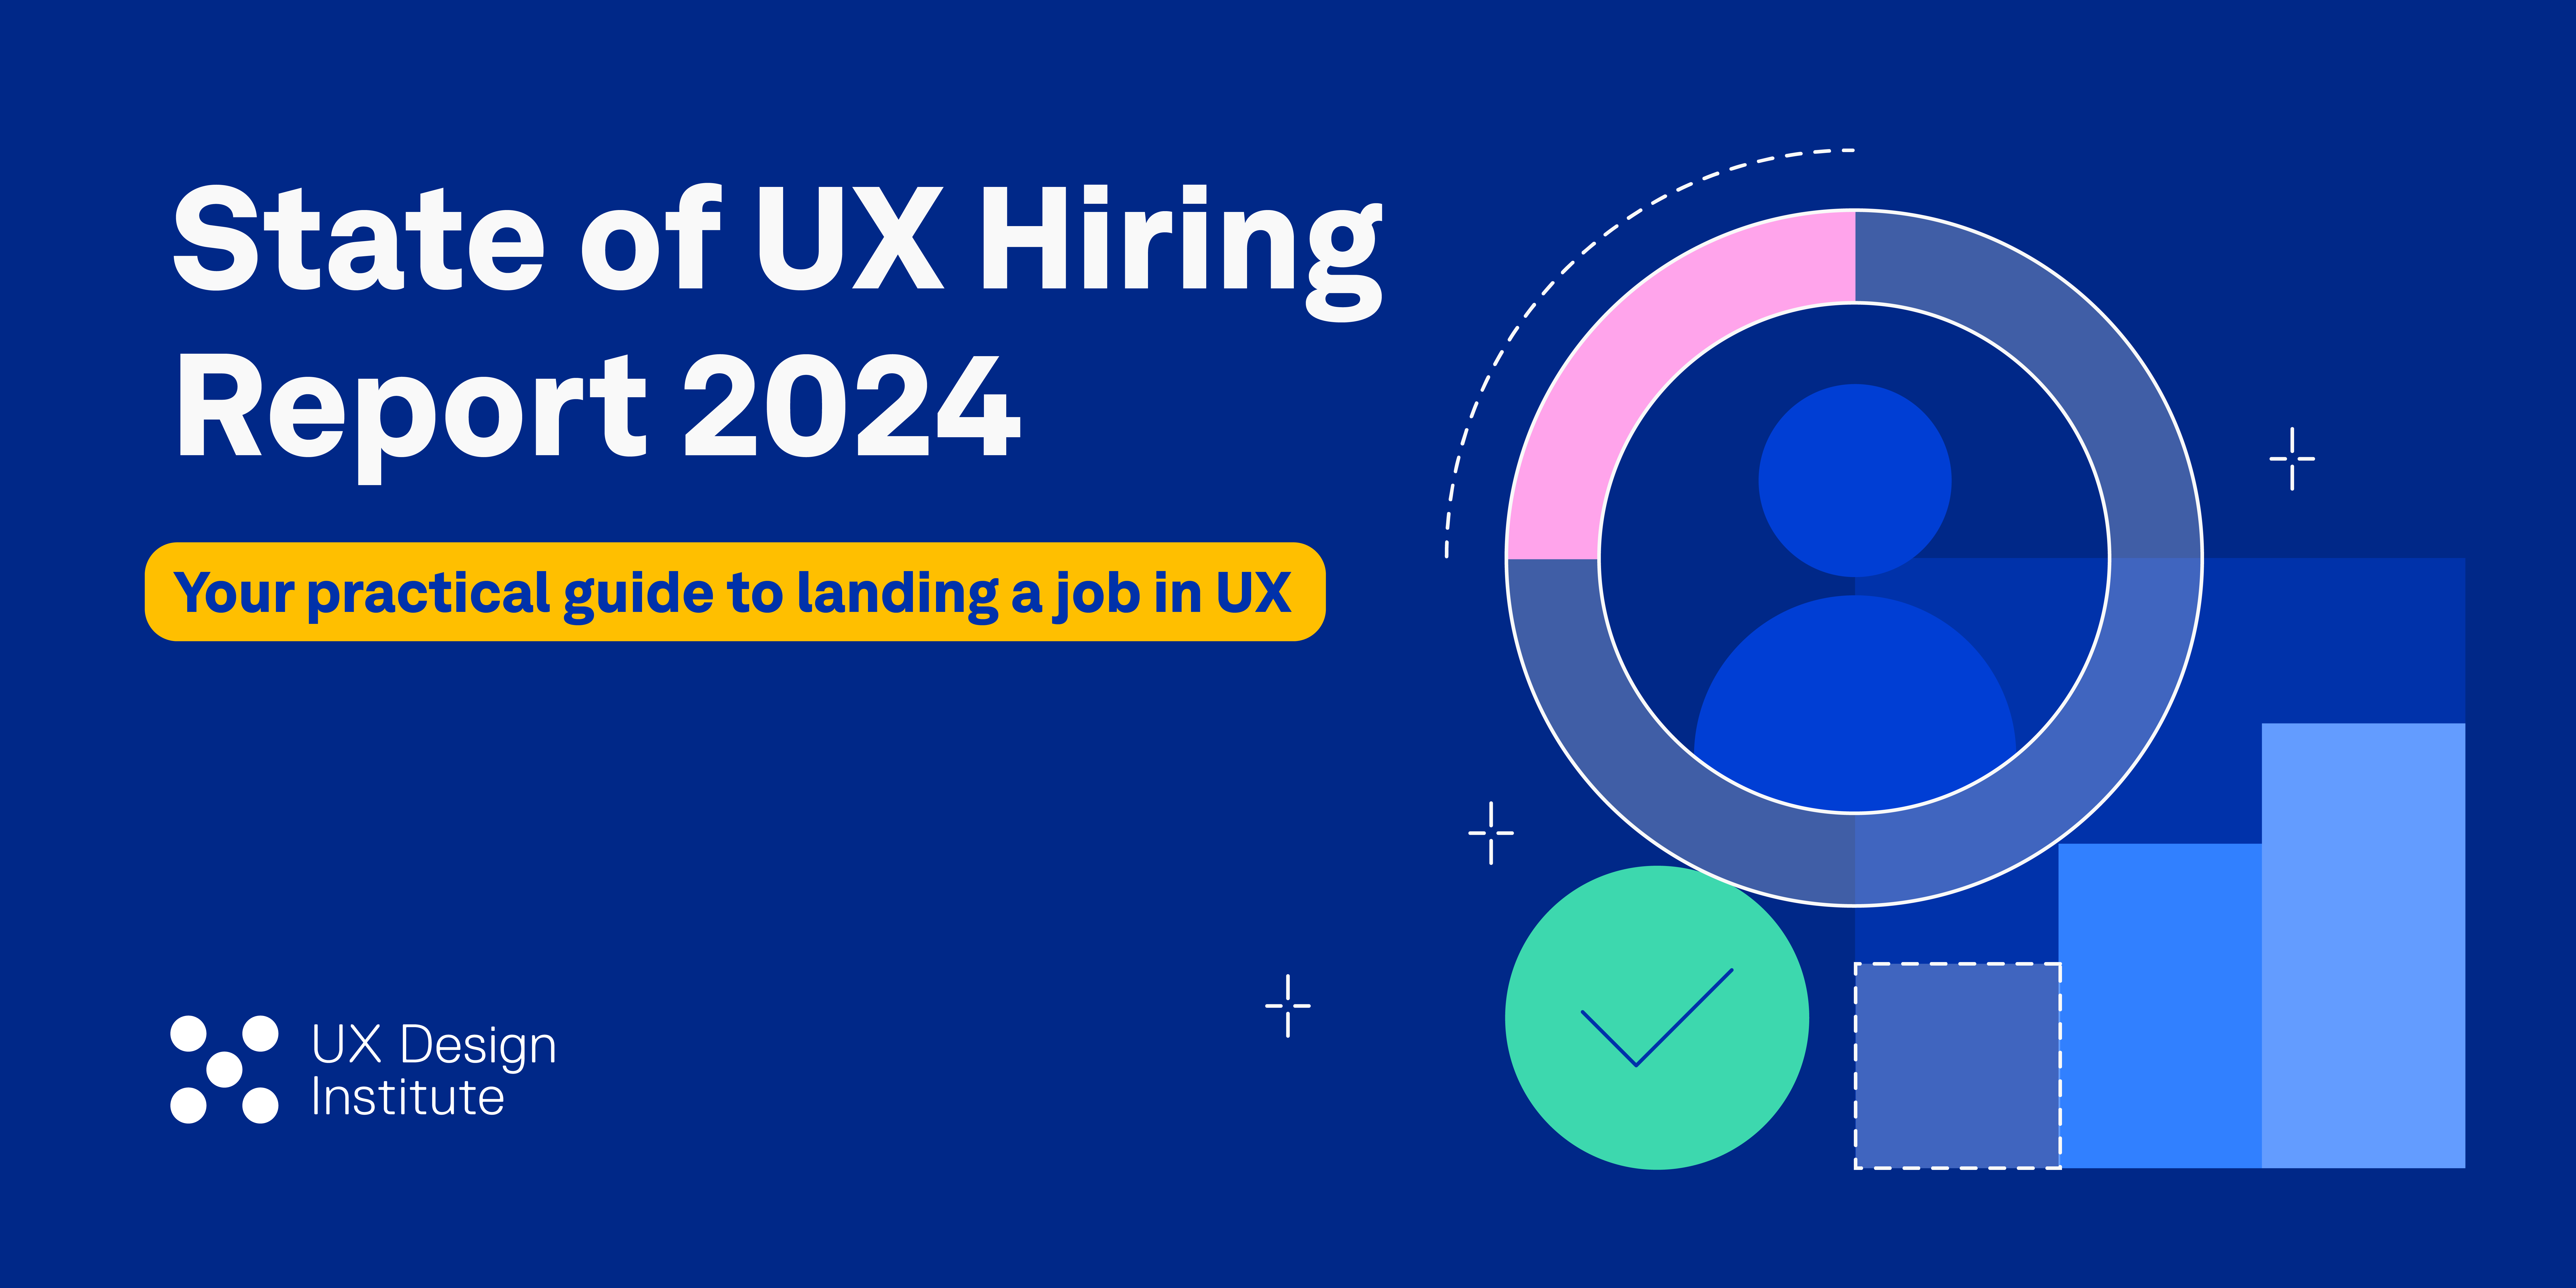 Illustration with the title of the State of UX Hiring Report 2024 - ux jobs